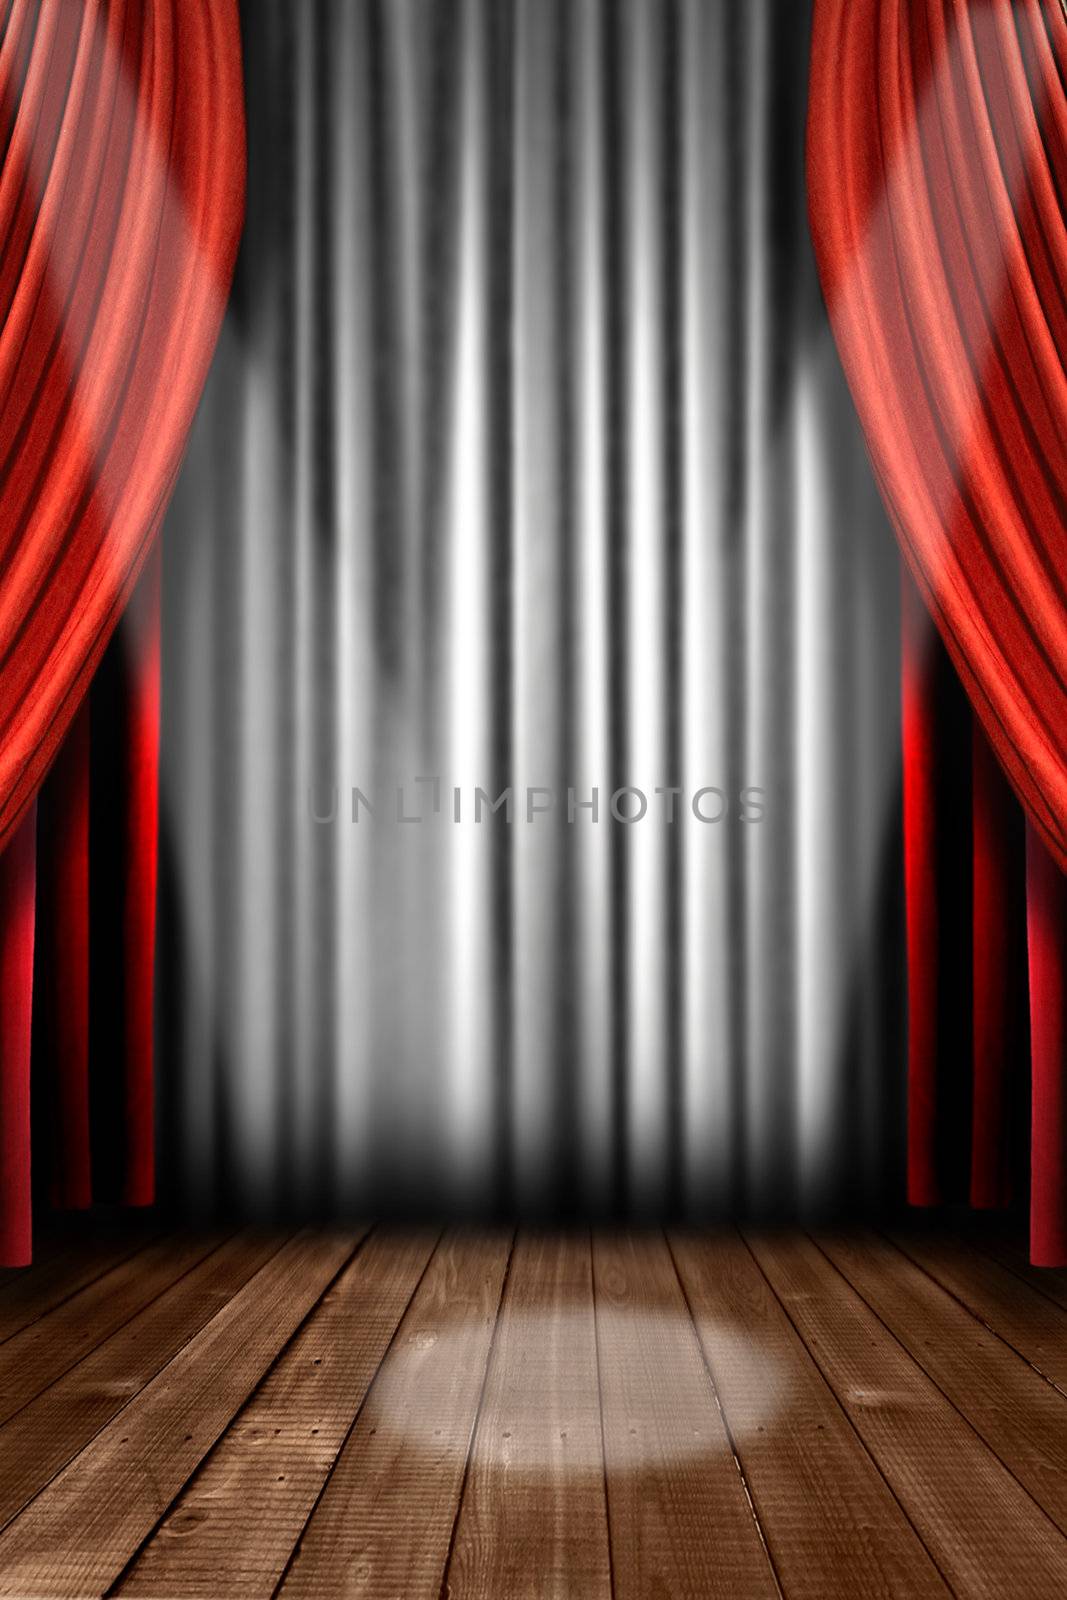 Vertical Stage Drapes With Dramatic Spotlight in the Center